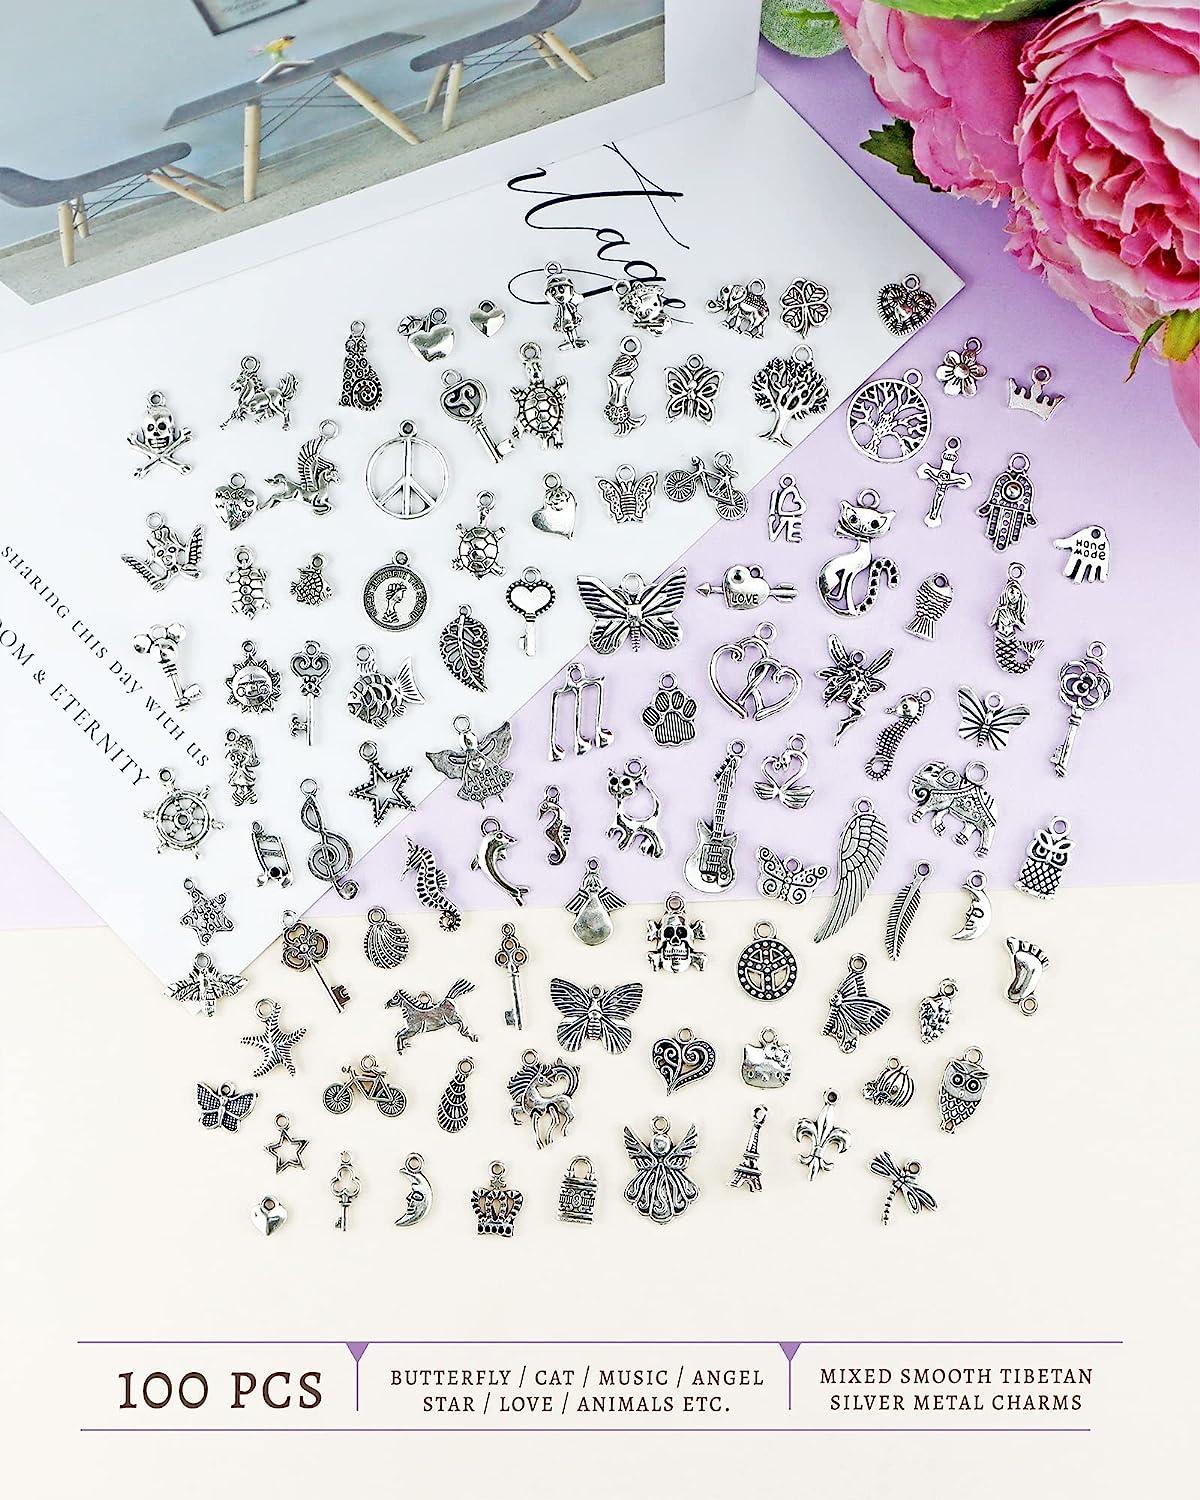 300 Pieces Vintage Charms Bulk Lots Mixed Antique Tibetan Silver & Gold Alloy Pendants Charms DIY for Necklace Bracelet Jewelry Making and Crafting